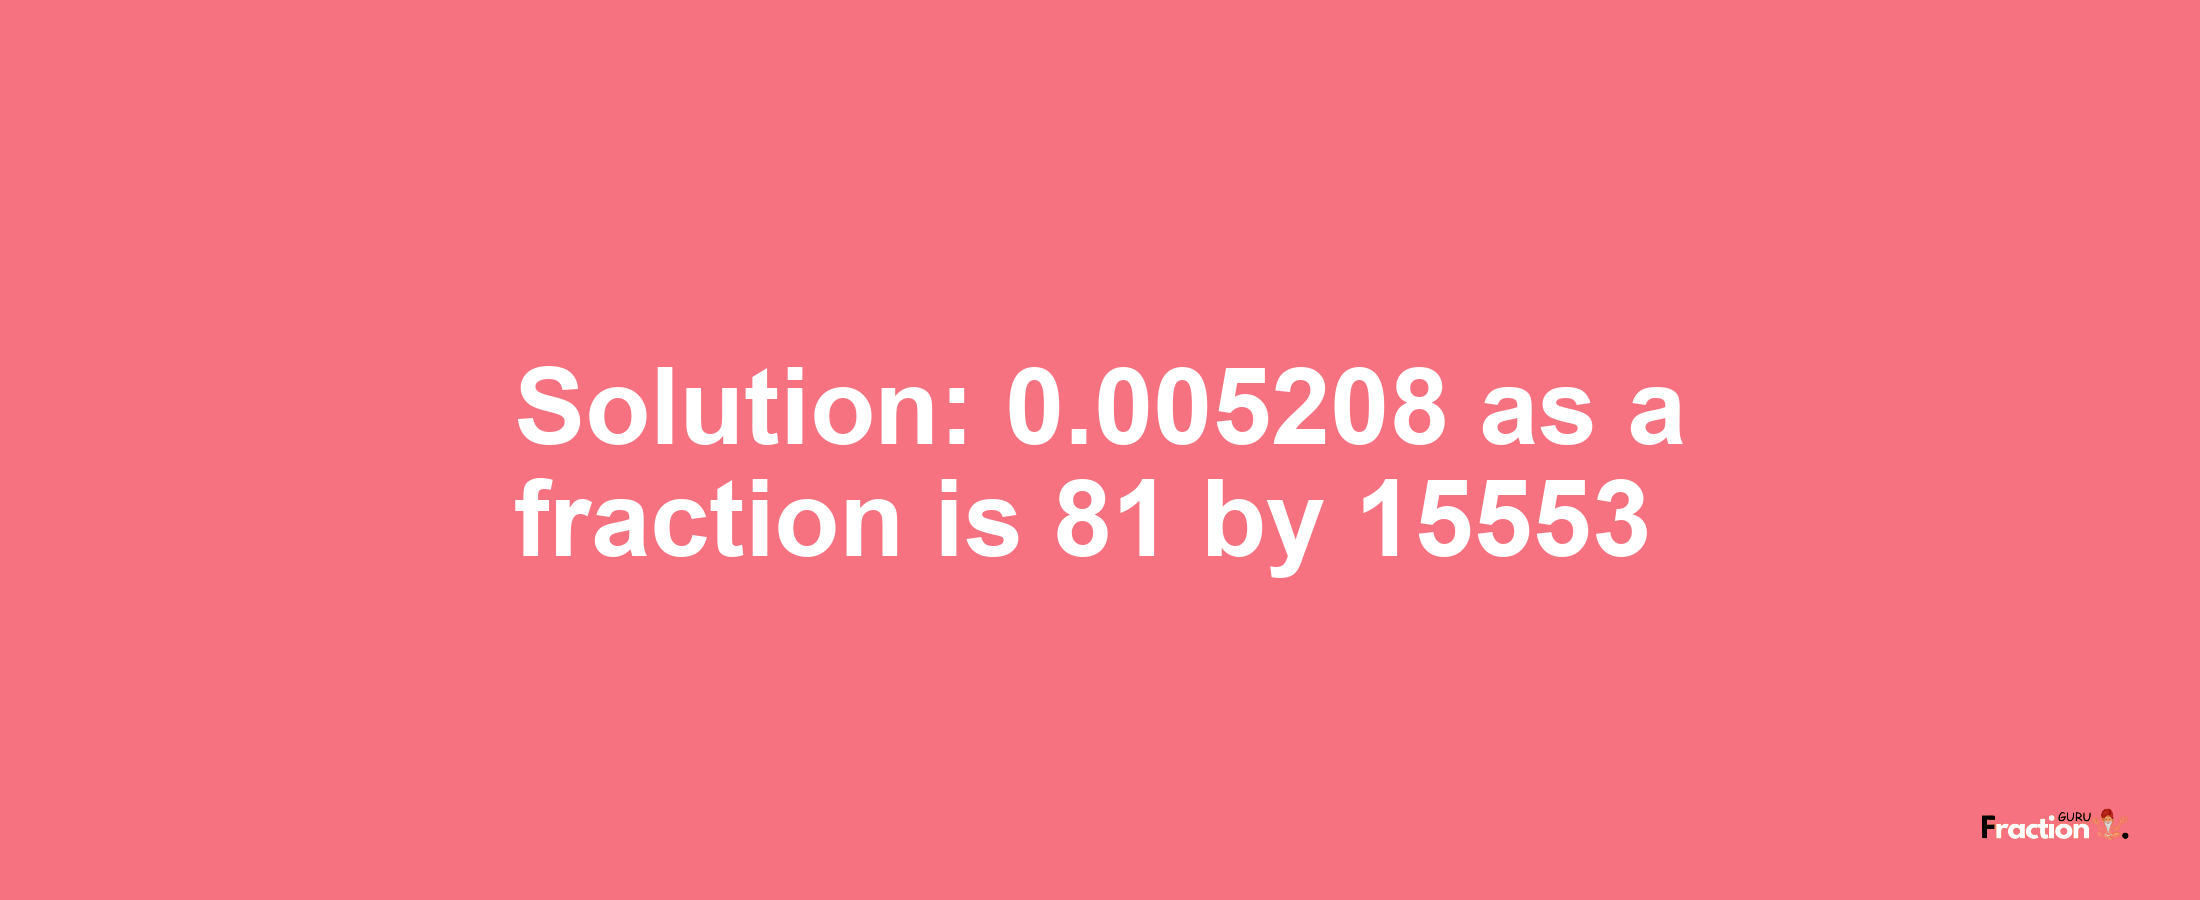 Solution:0.005208 as a fraction is 81/15553